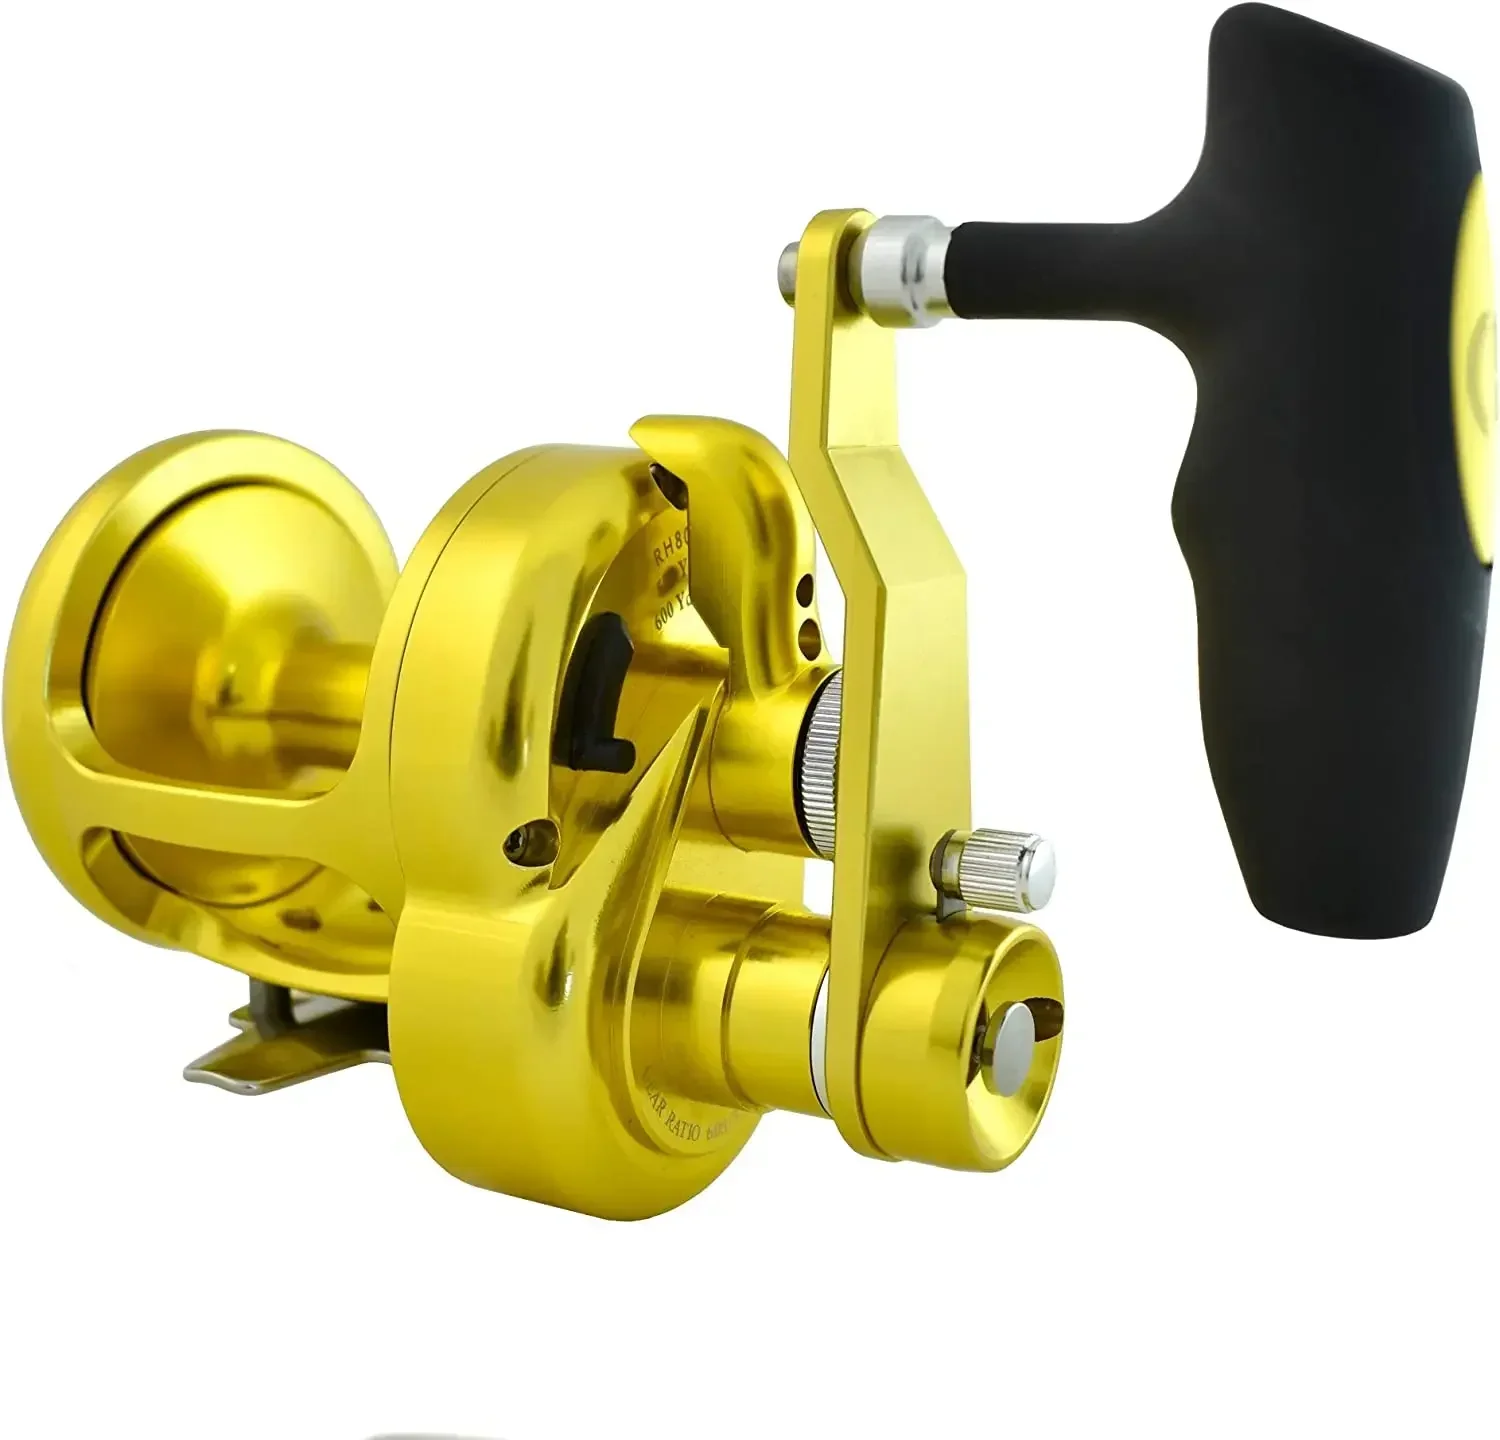 

2023 SUMMER 50% DISCOUNT SALES BUY 10 GET 5 FREE UNIT EatMyTackle 18W 2-Speed Saltwater Fishing Reel | Blue Marlin Tournament Ed